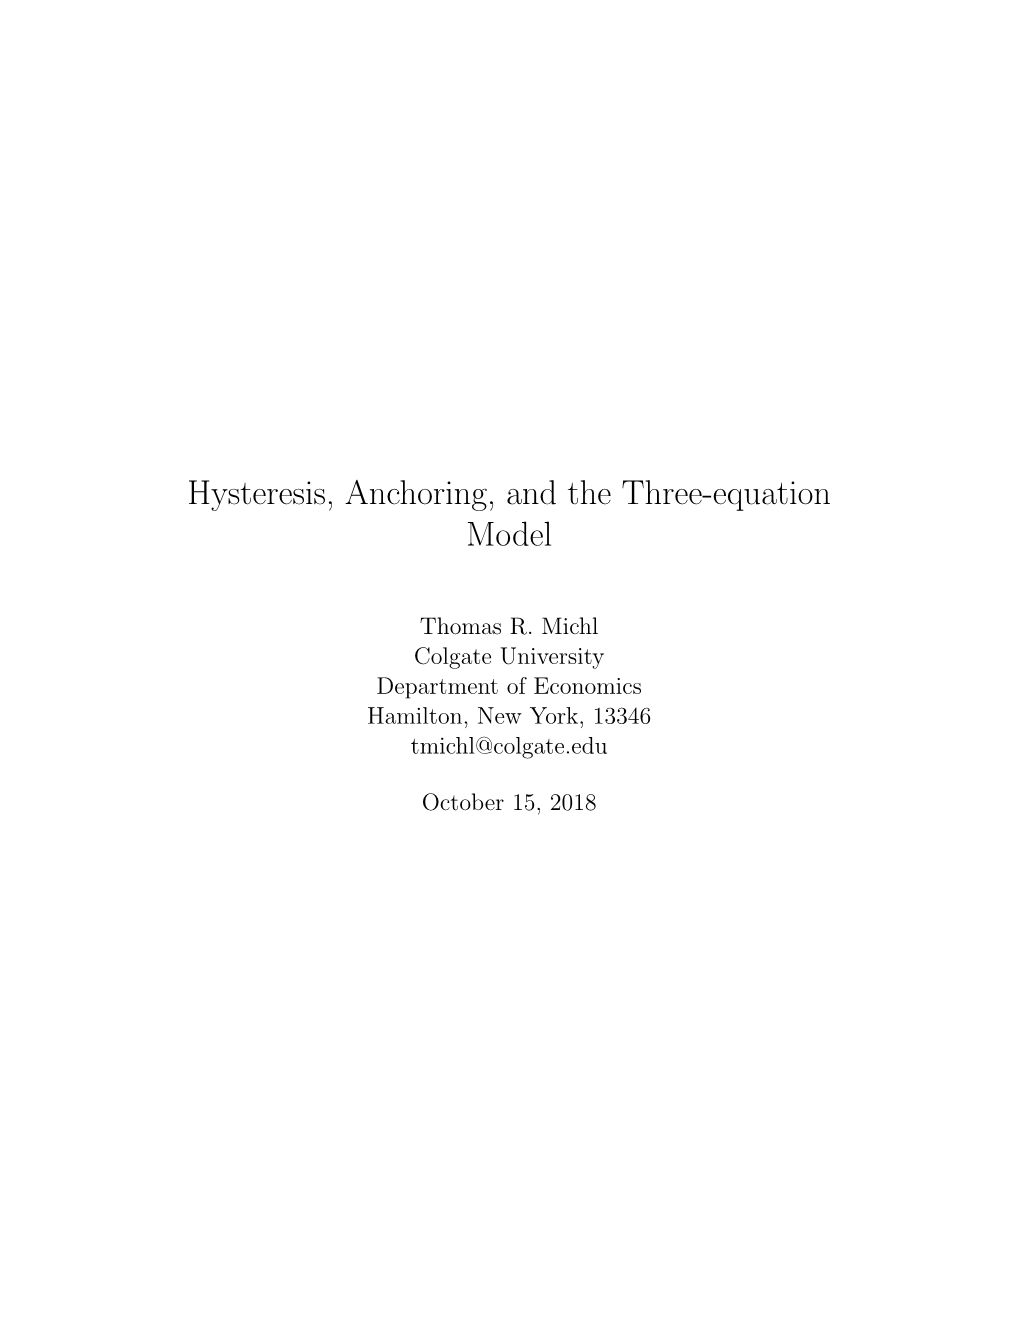 Hysteresis, Anchoring, and the Three-Equation Model